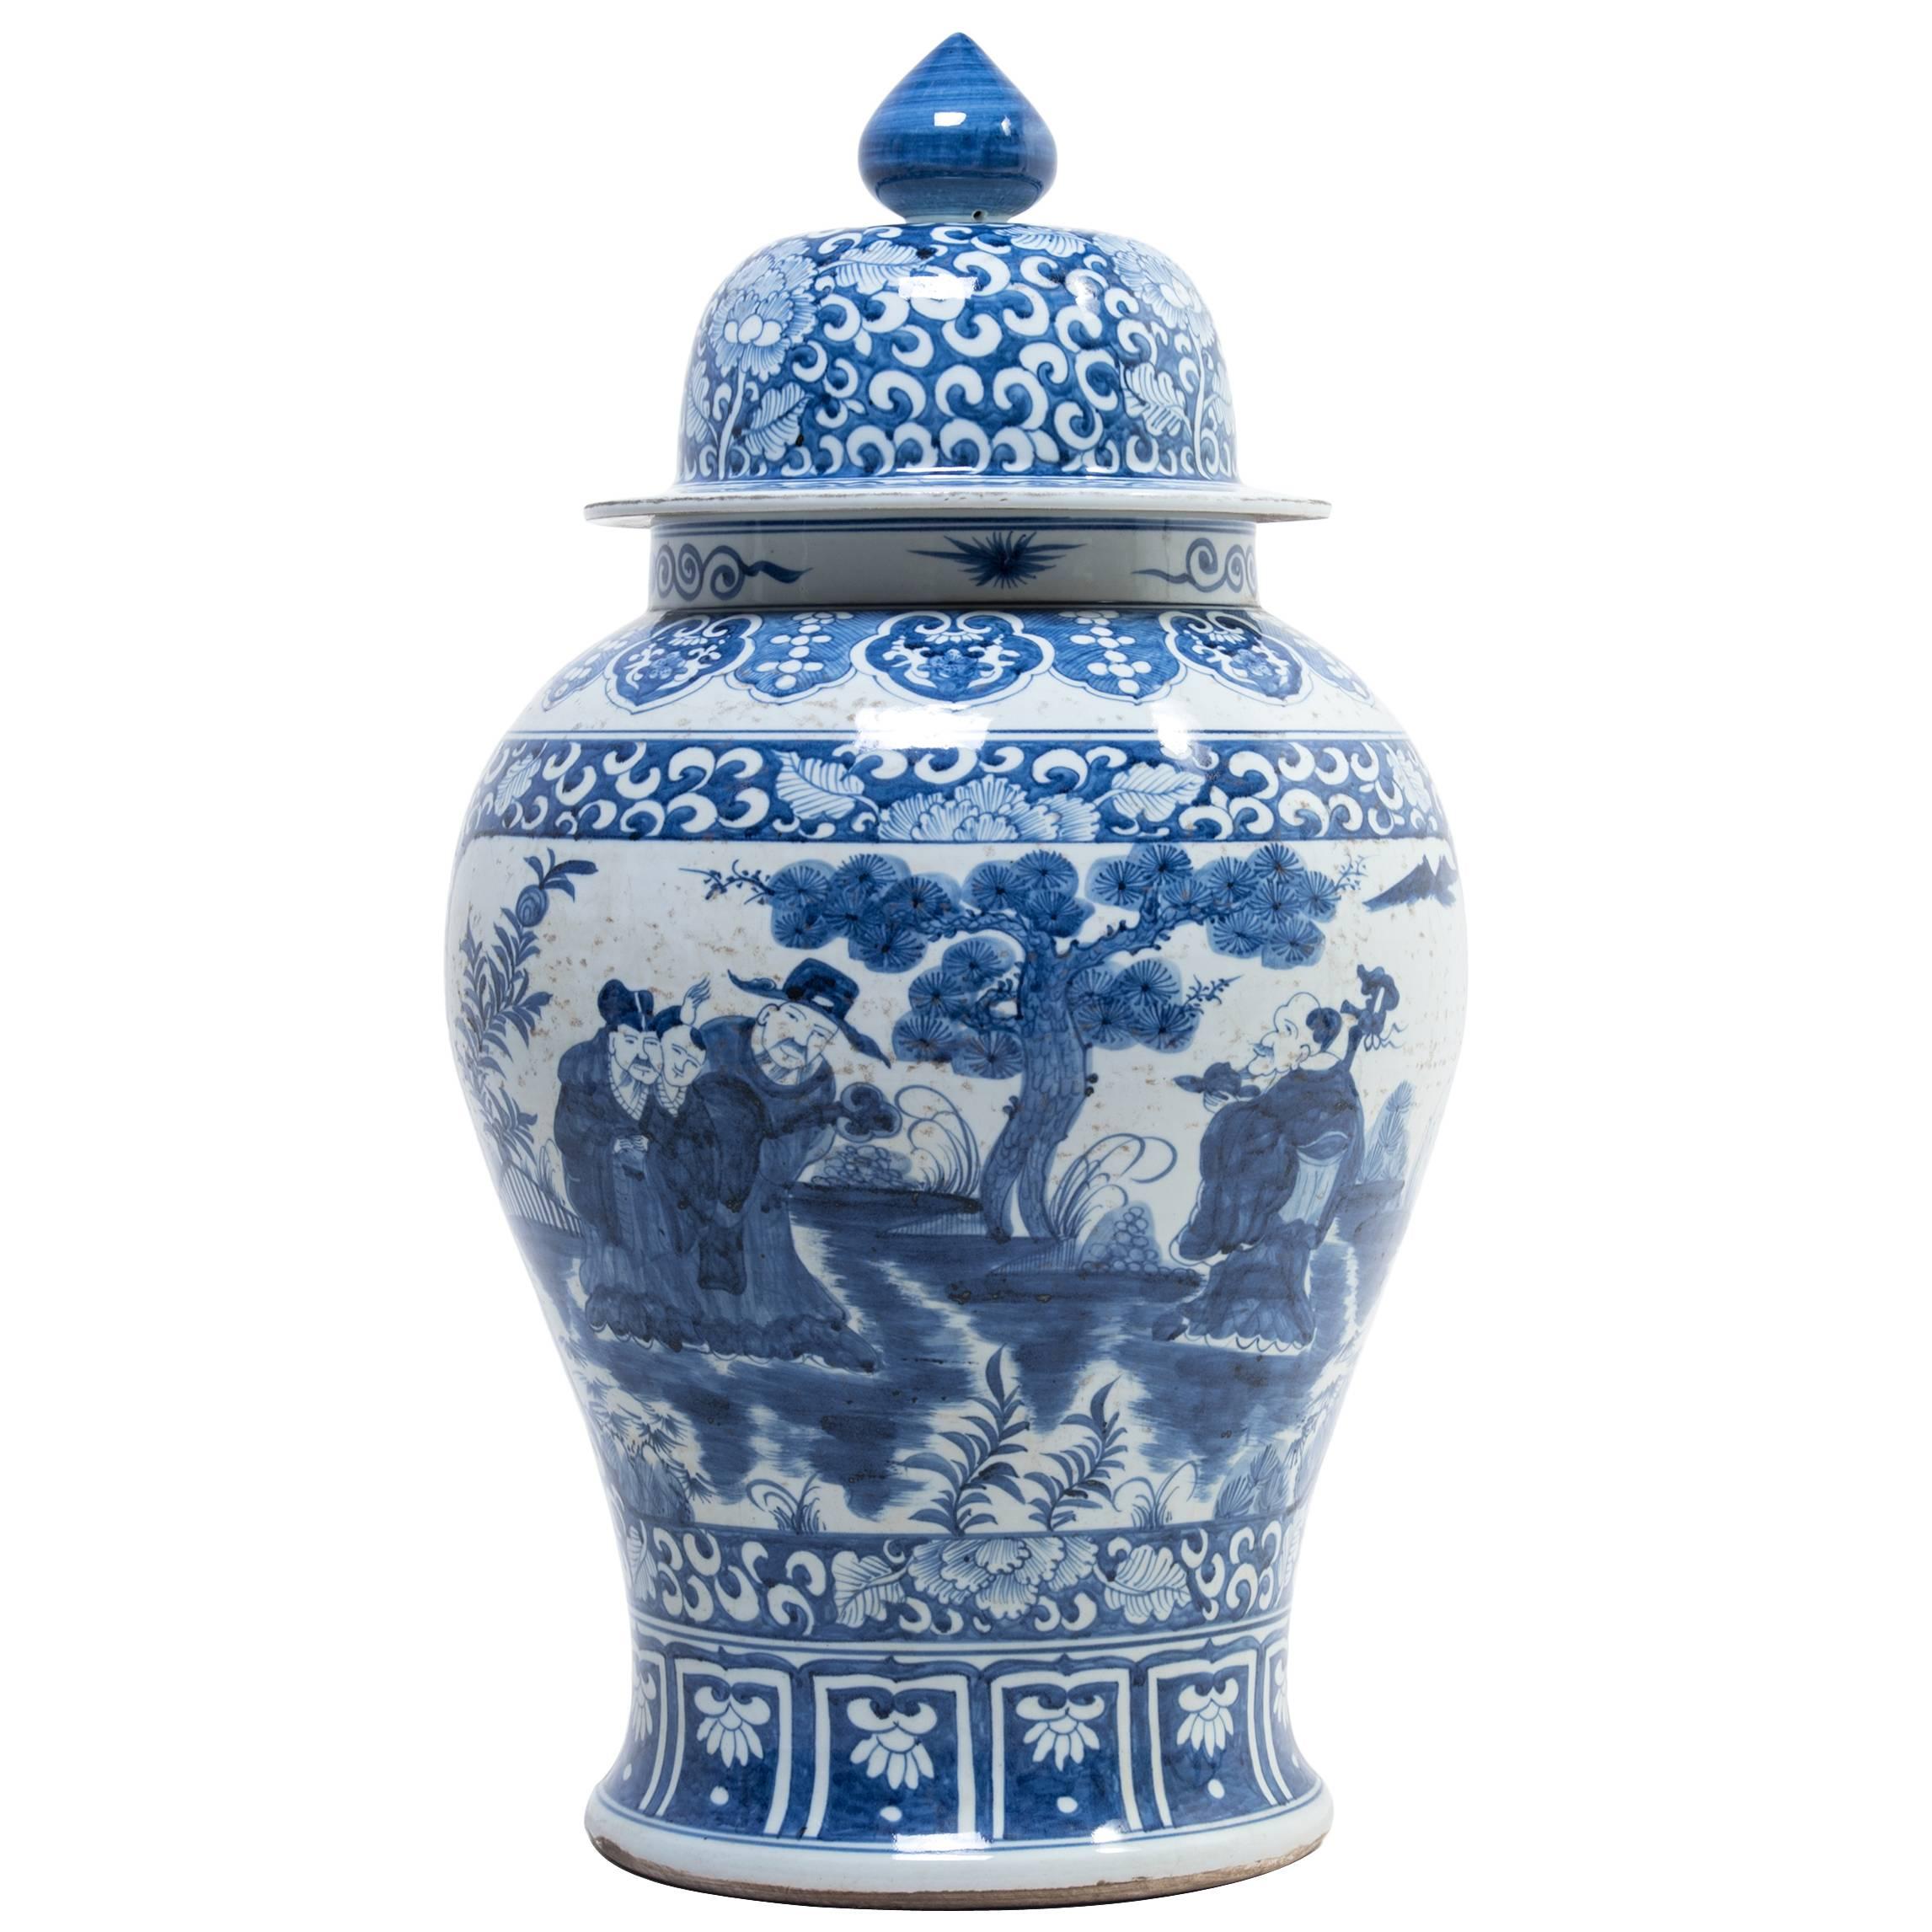 Blue and White Ginger Jar with Scholars in a Garden Portraits